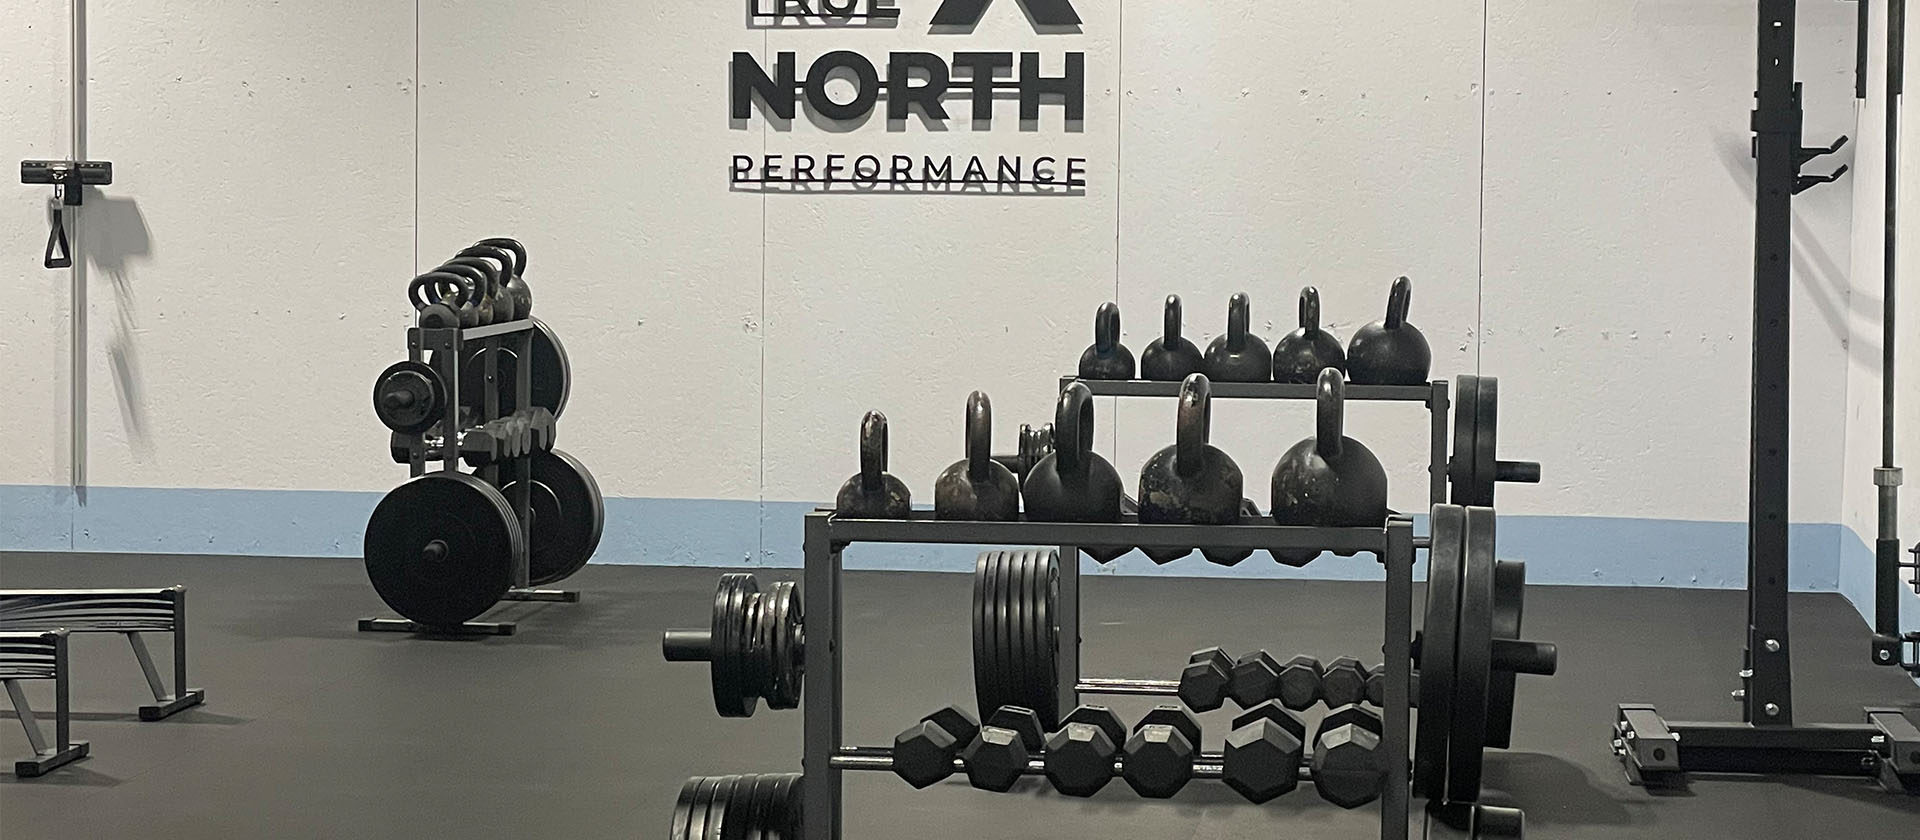 Why True North Performance Is Ranked One of The Best Gyms In Green Bay, Wisconsin